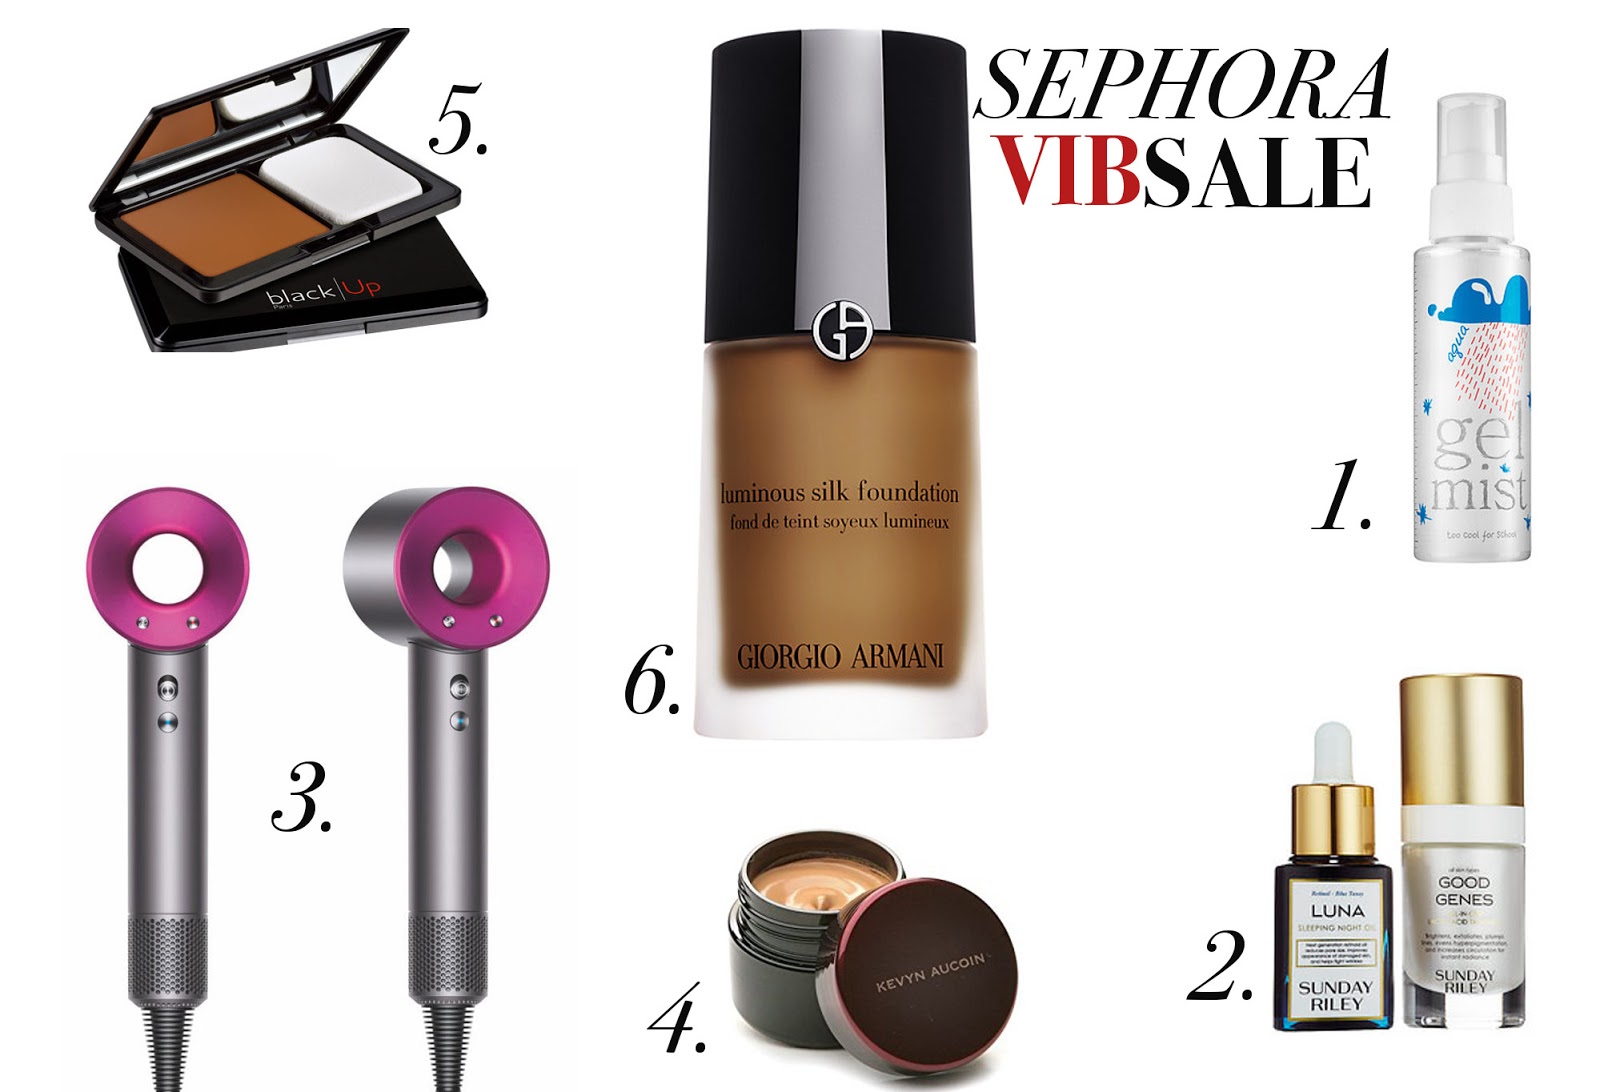 [Sephora VIB Sale] Time to grab my most Coveted Beauty Essentials